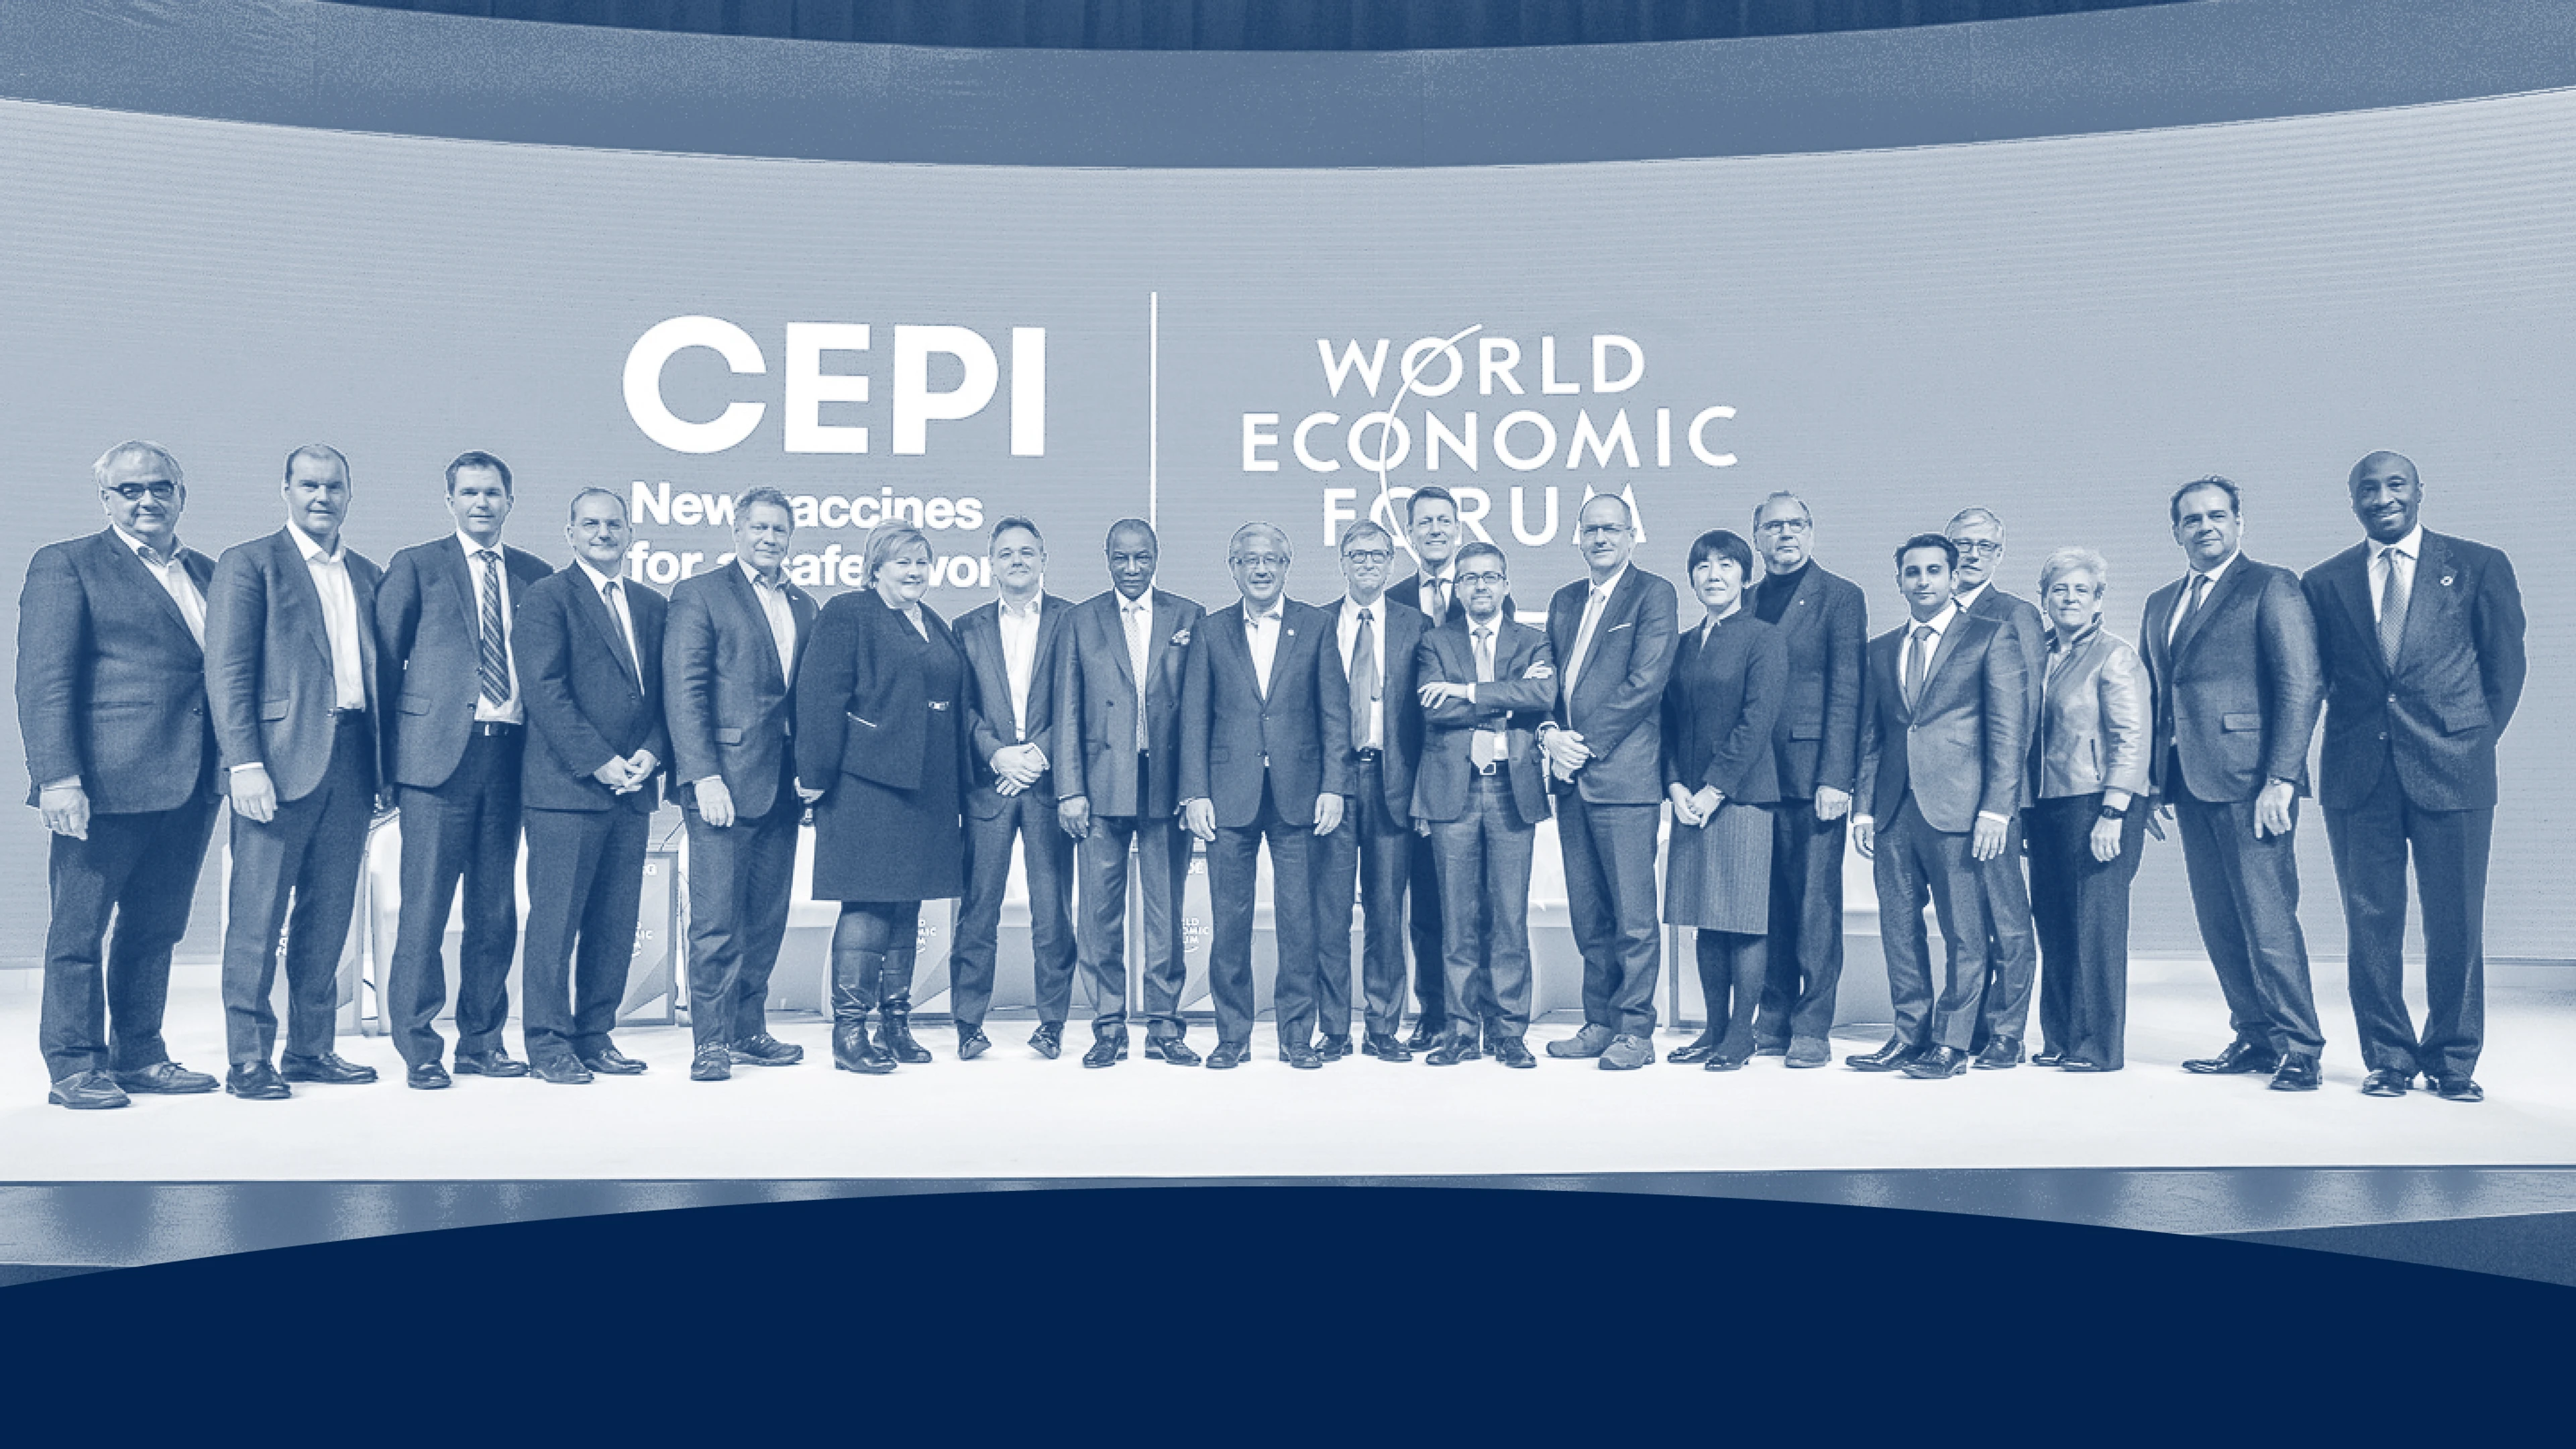 group shot of people forming CEPI on stage